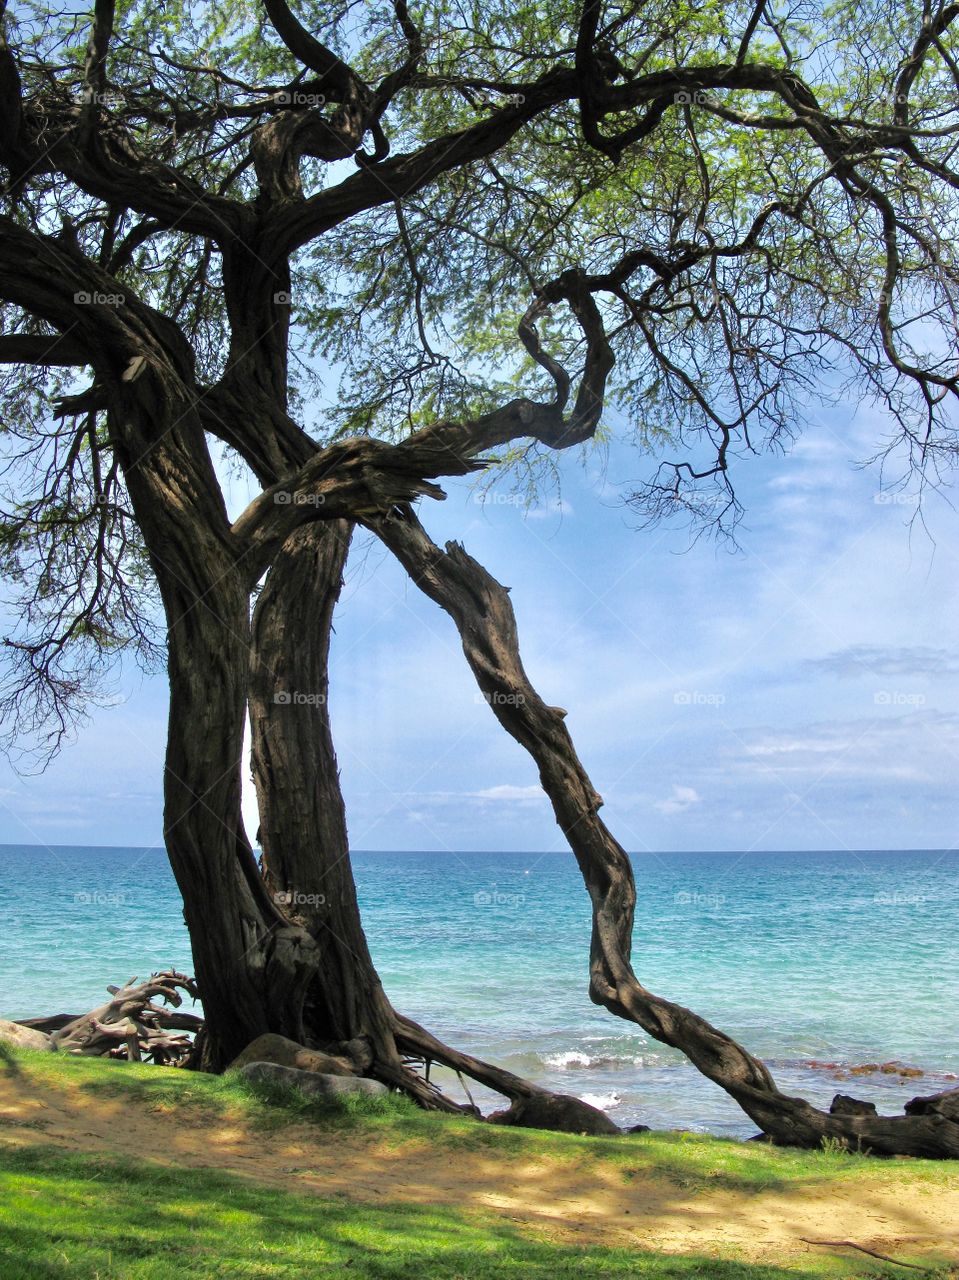 Tree by the beach with calm pacific waters in background